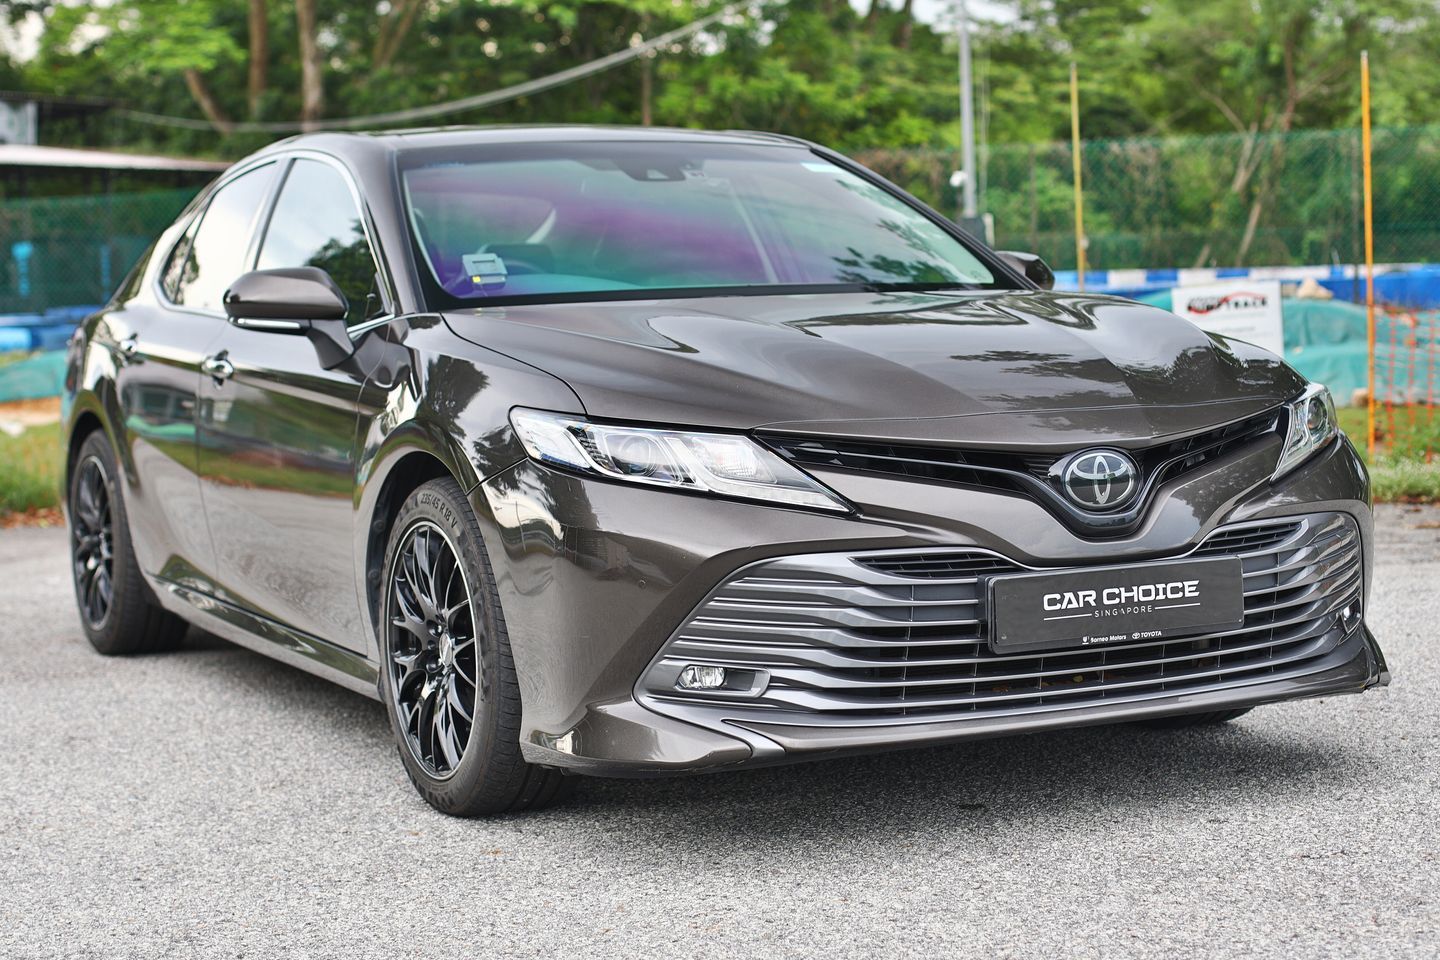 Certified Pre-Owned Toyota Camry 2.5A | Car Choice Singapore